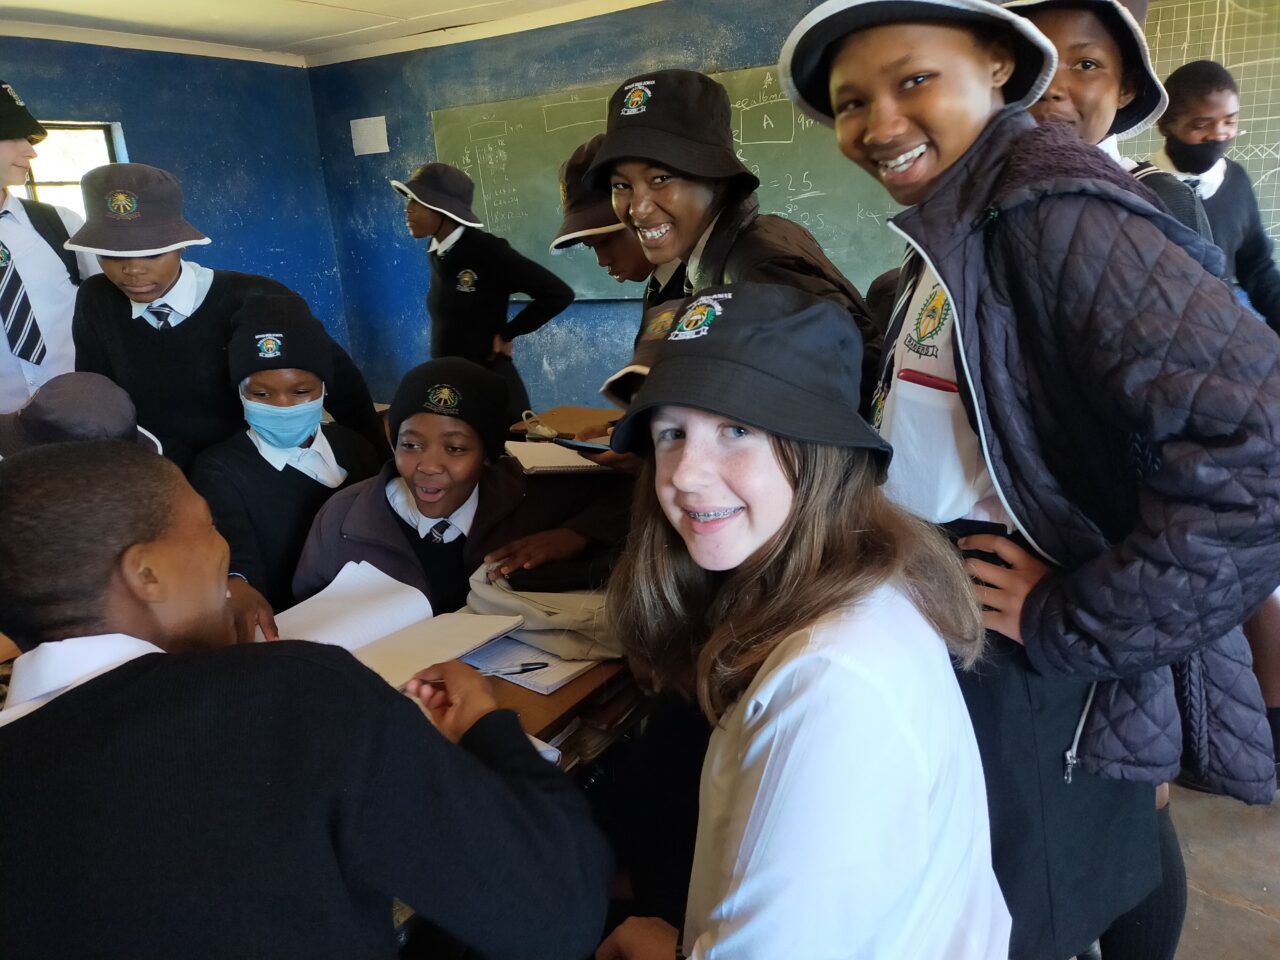 A group of young people in a classroom, where some are smiling at the camera and some are wearing bucket hats. Once person in the background is wearing a mask.